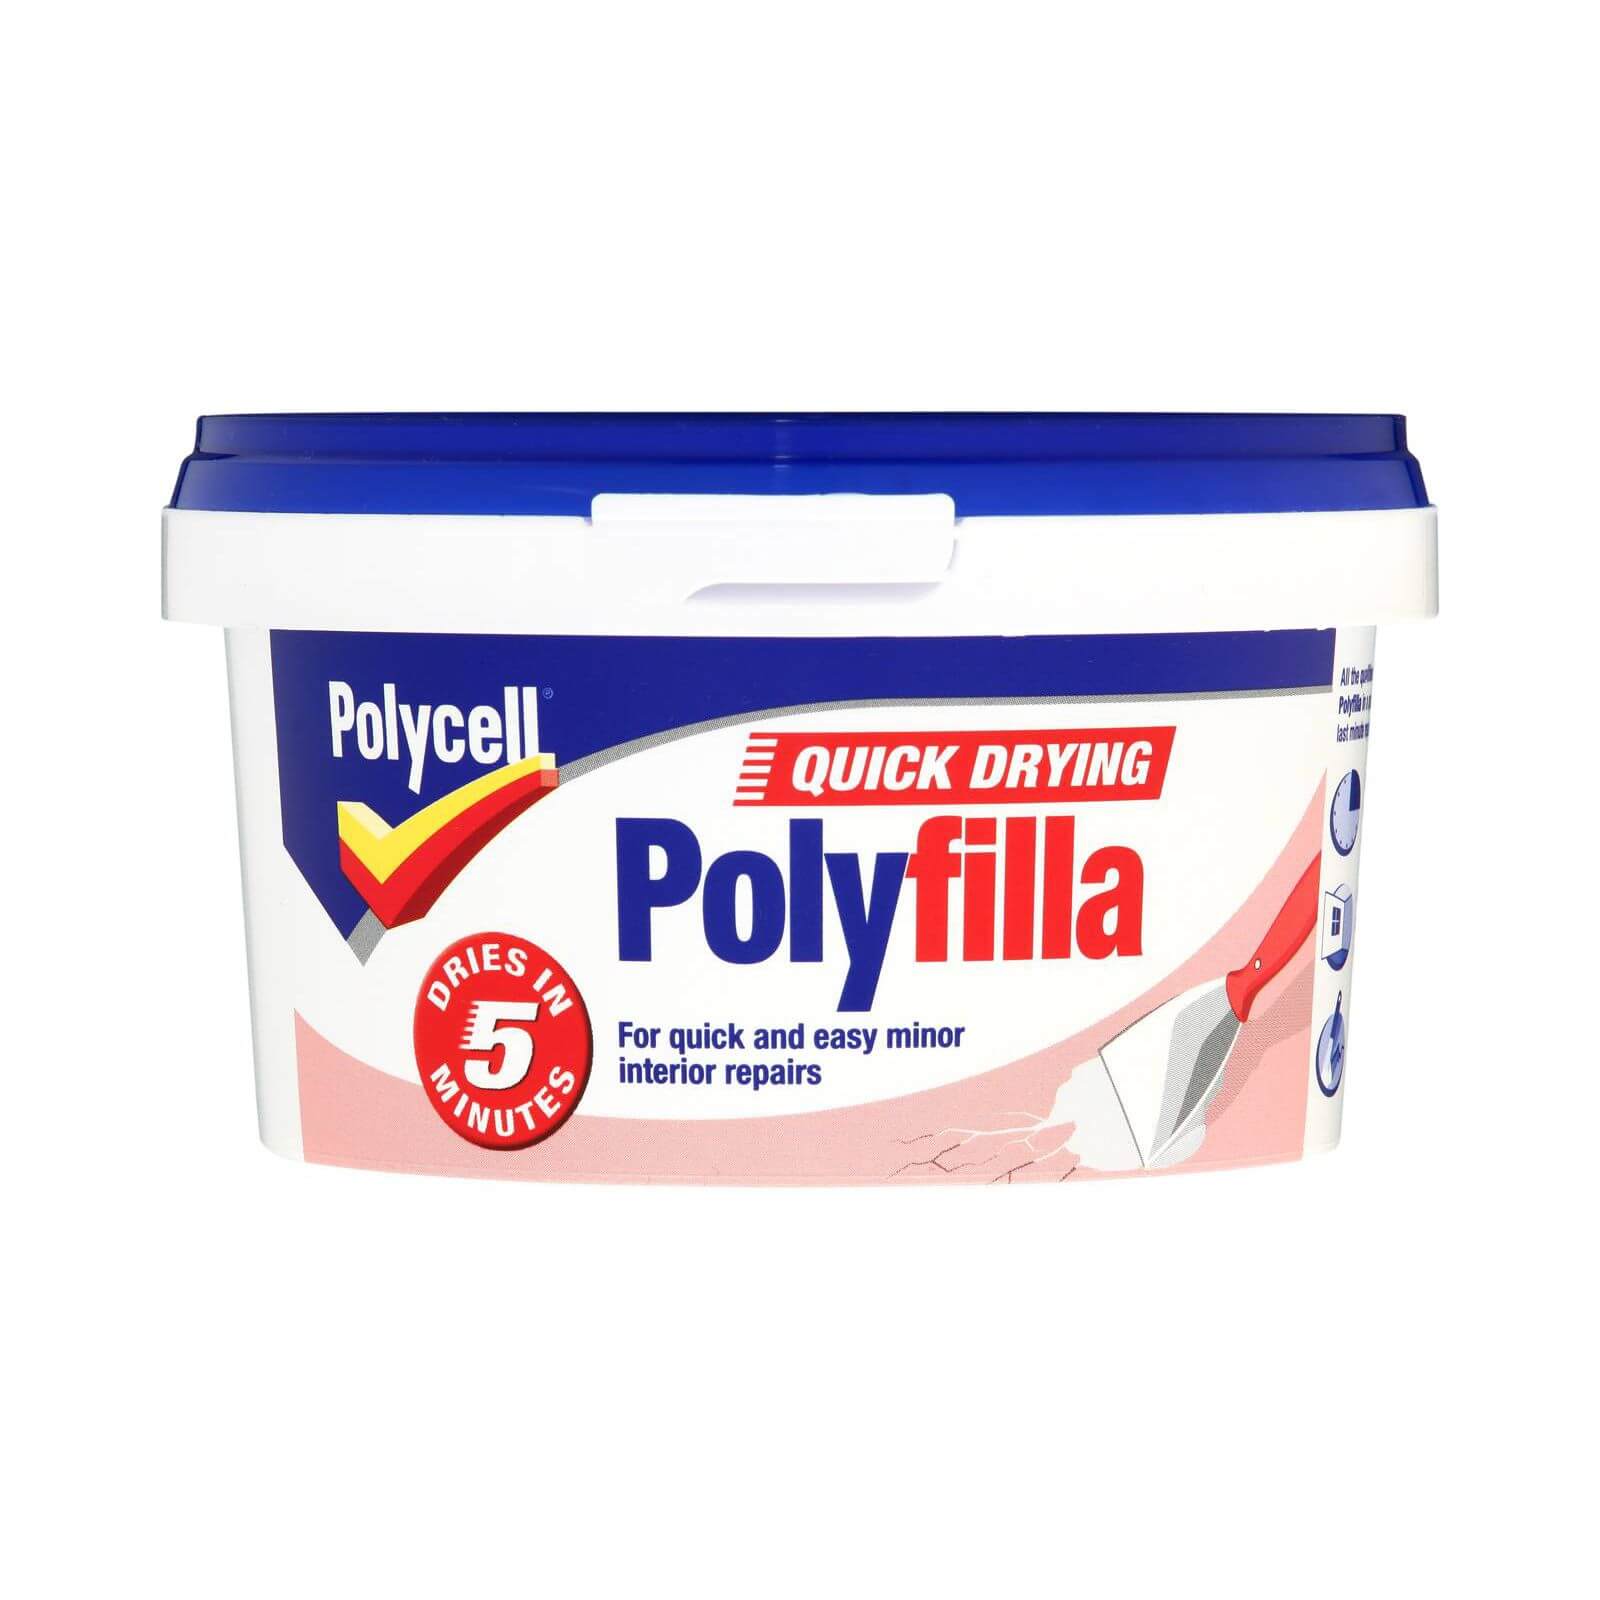 Photo of Polycell Quick Dry Polyfilla - 500g